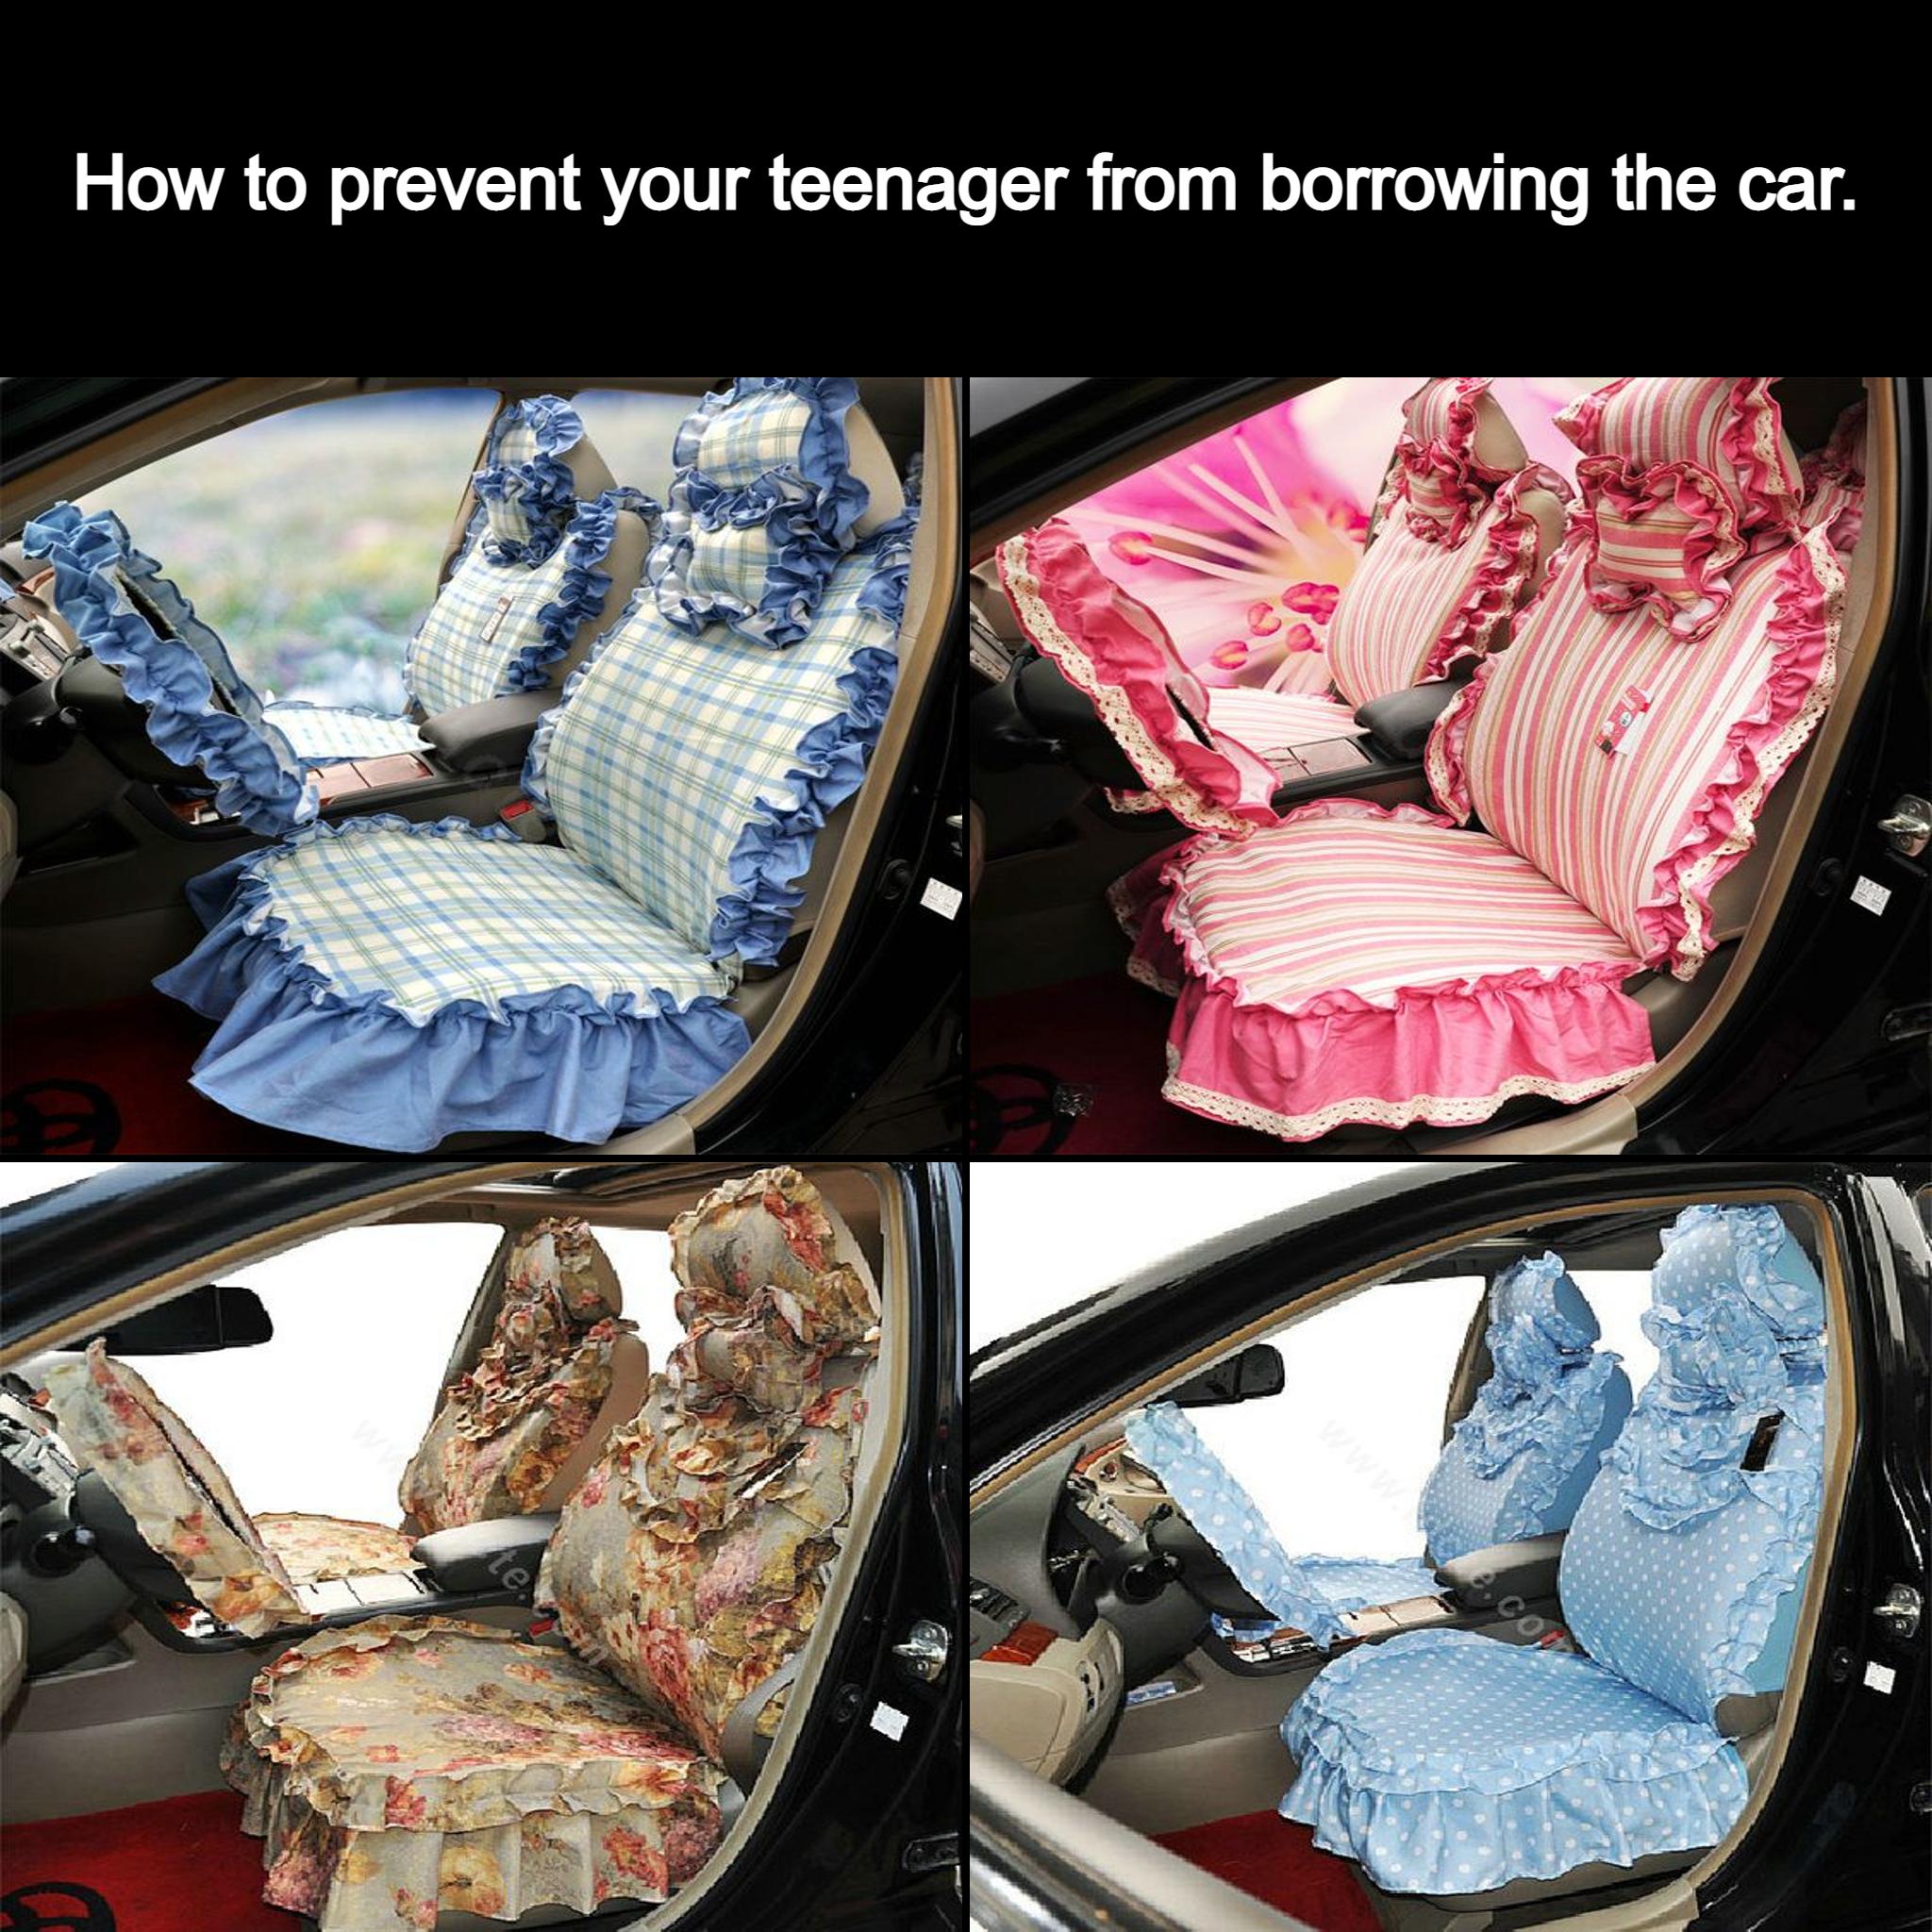 How you would furthermore prevent your youngster from borrowing the automobile.